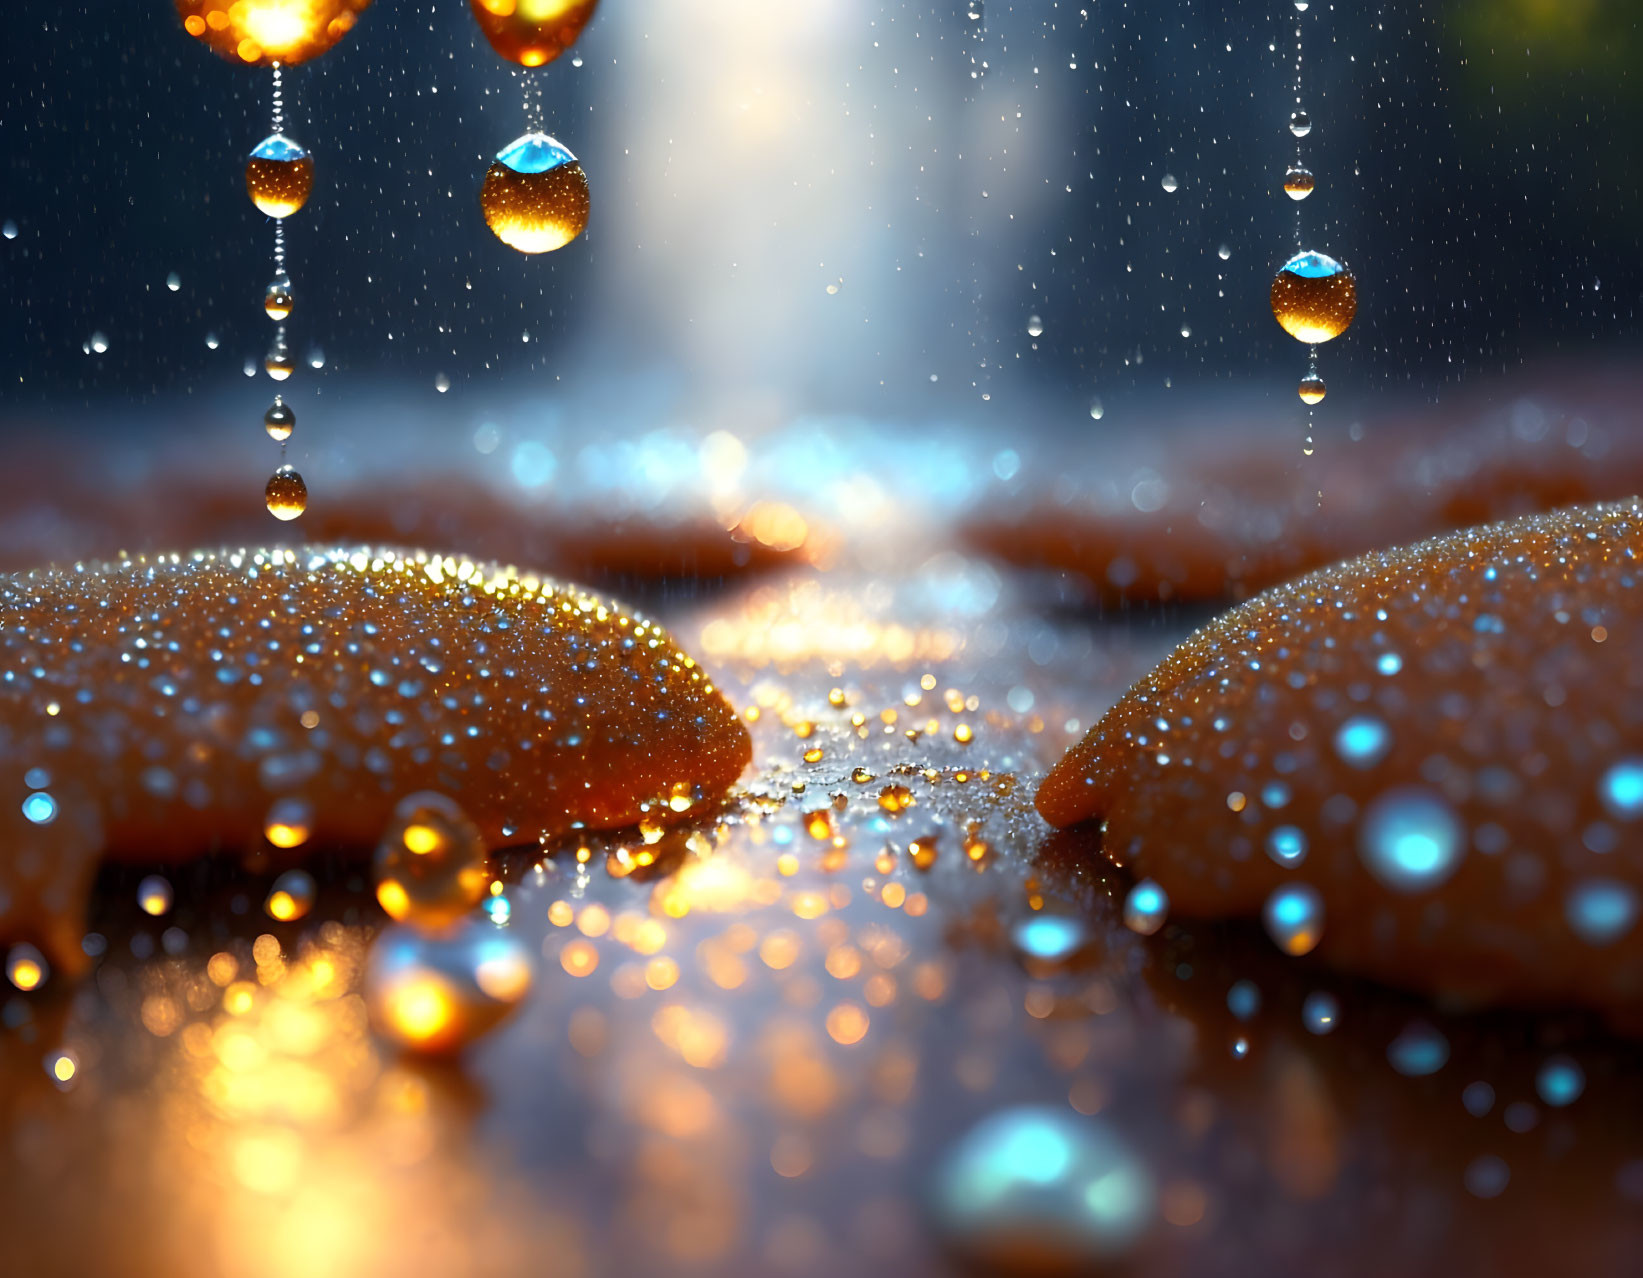 Shimmering golden droplets on a glistening surface with bokeh effect